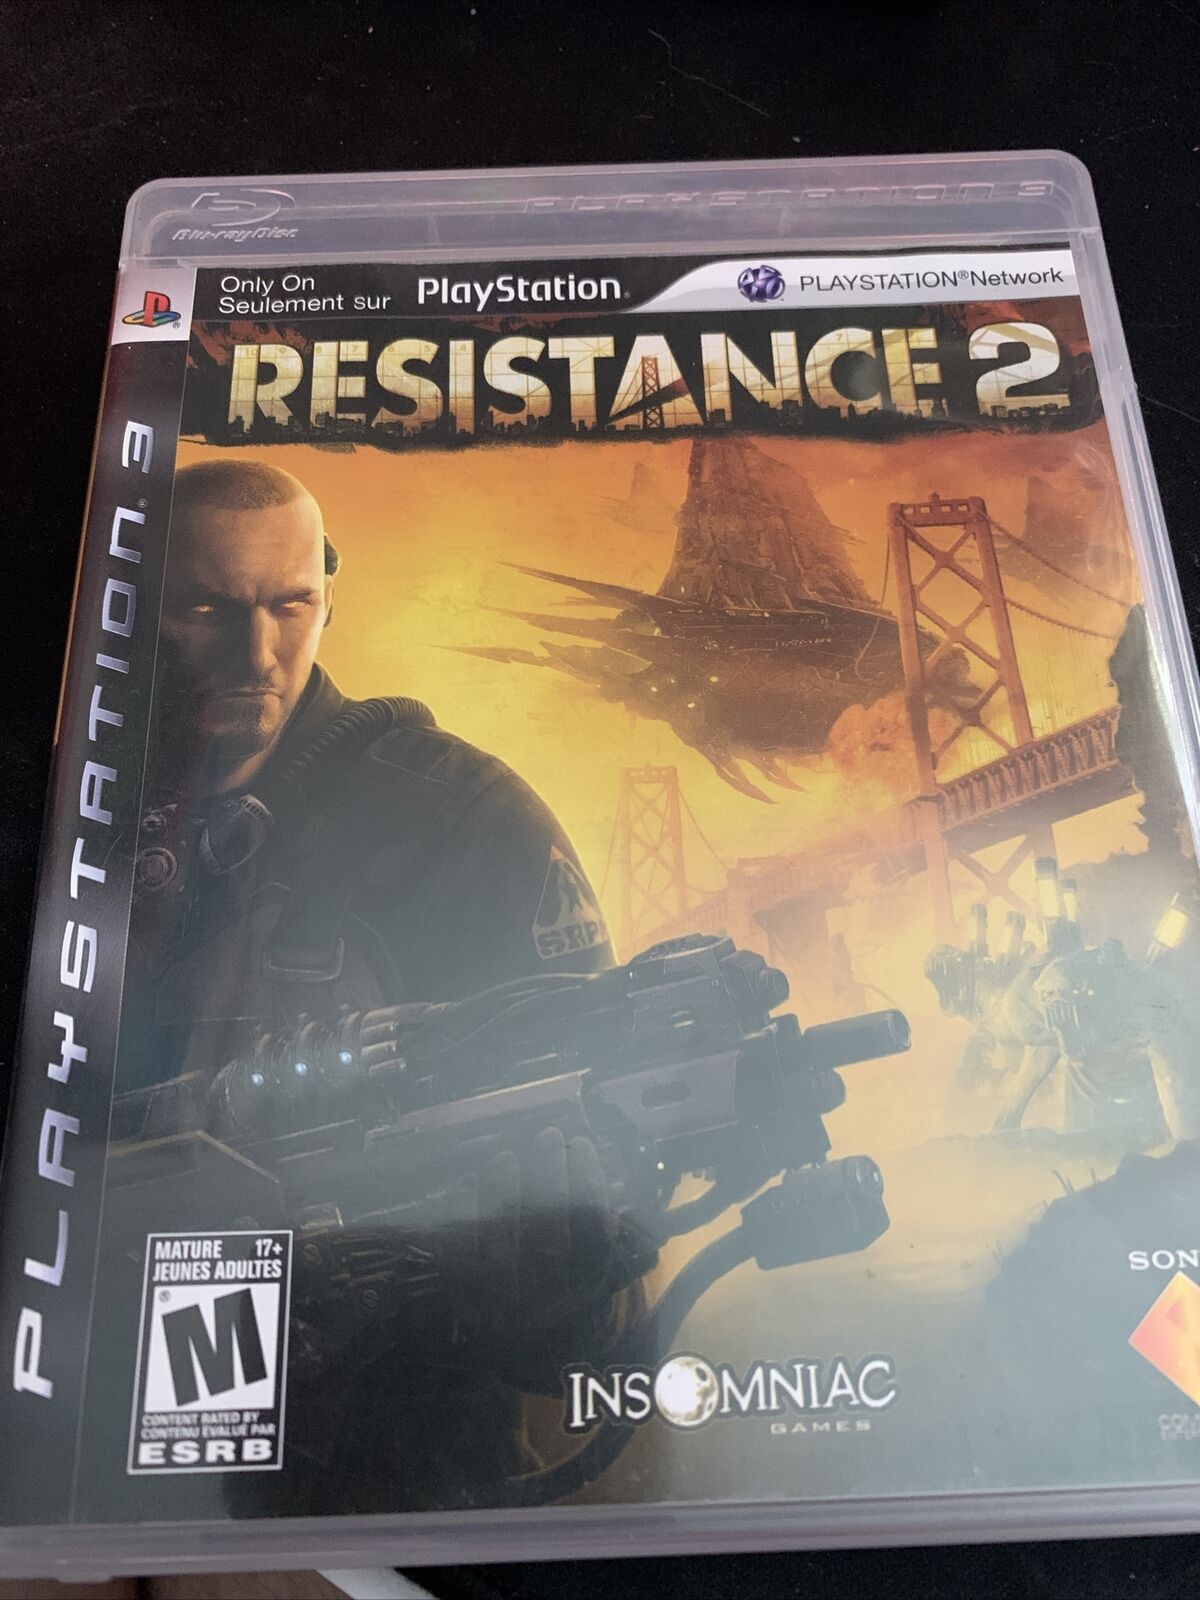 Resistance 2 (Sony PlayStation 3, 2008)